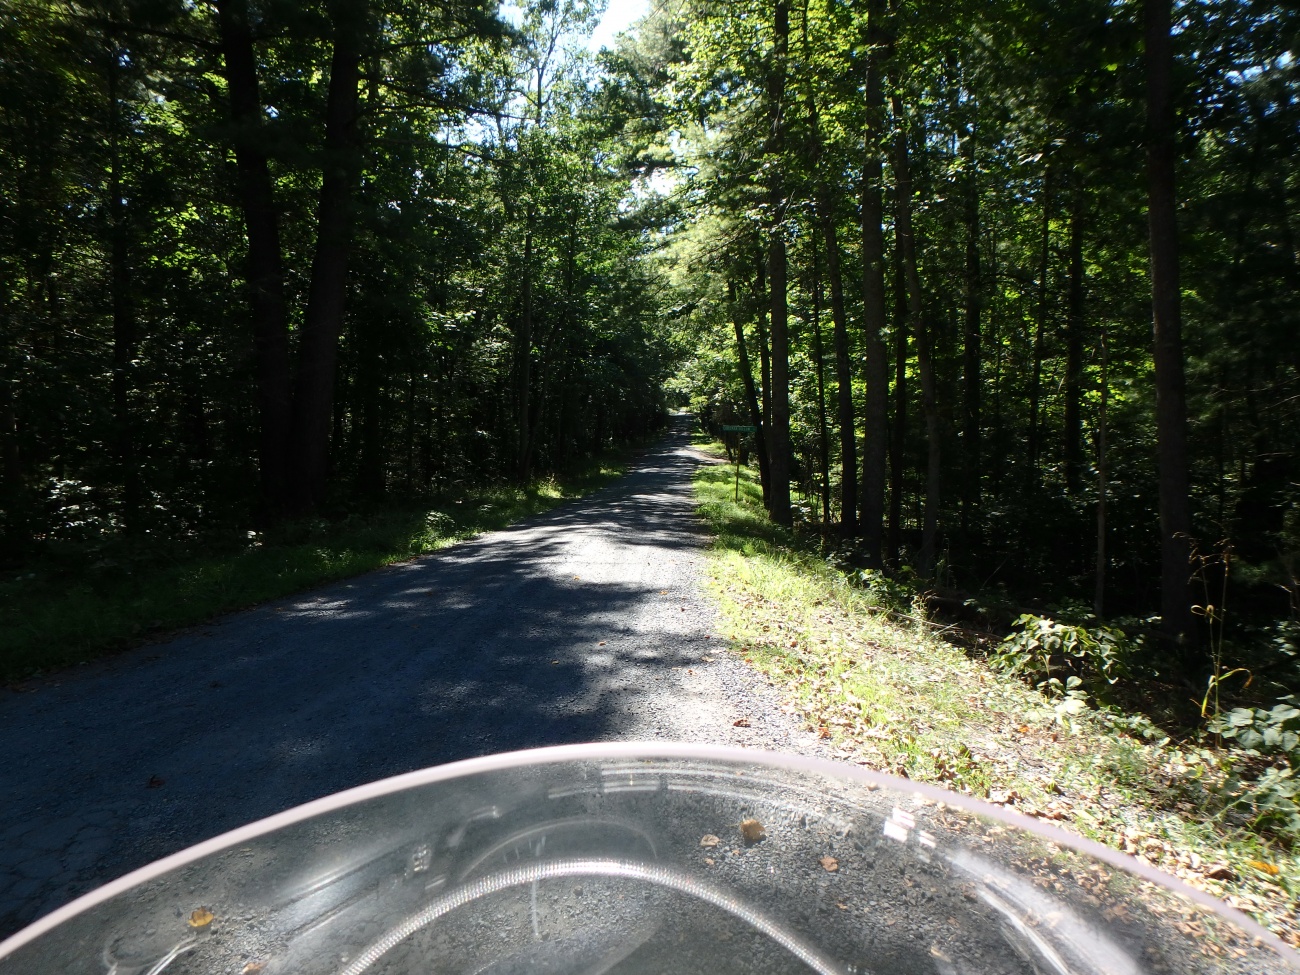 Fort Valley turns to a nice gravel road